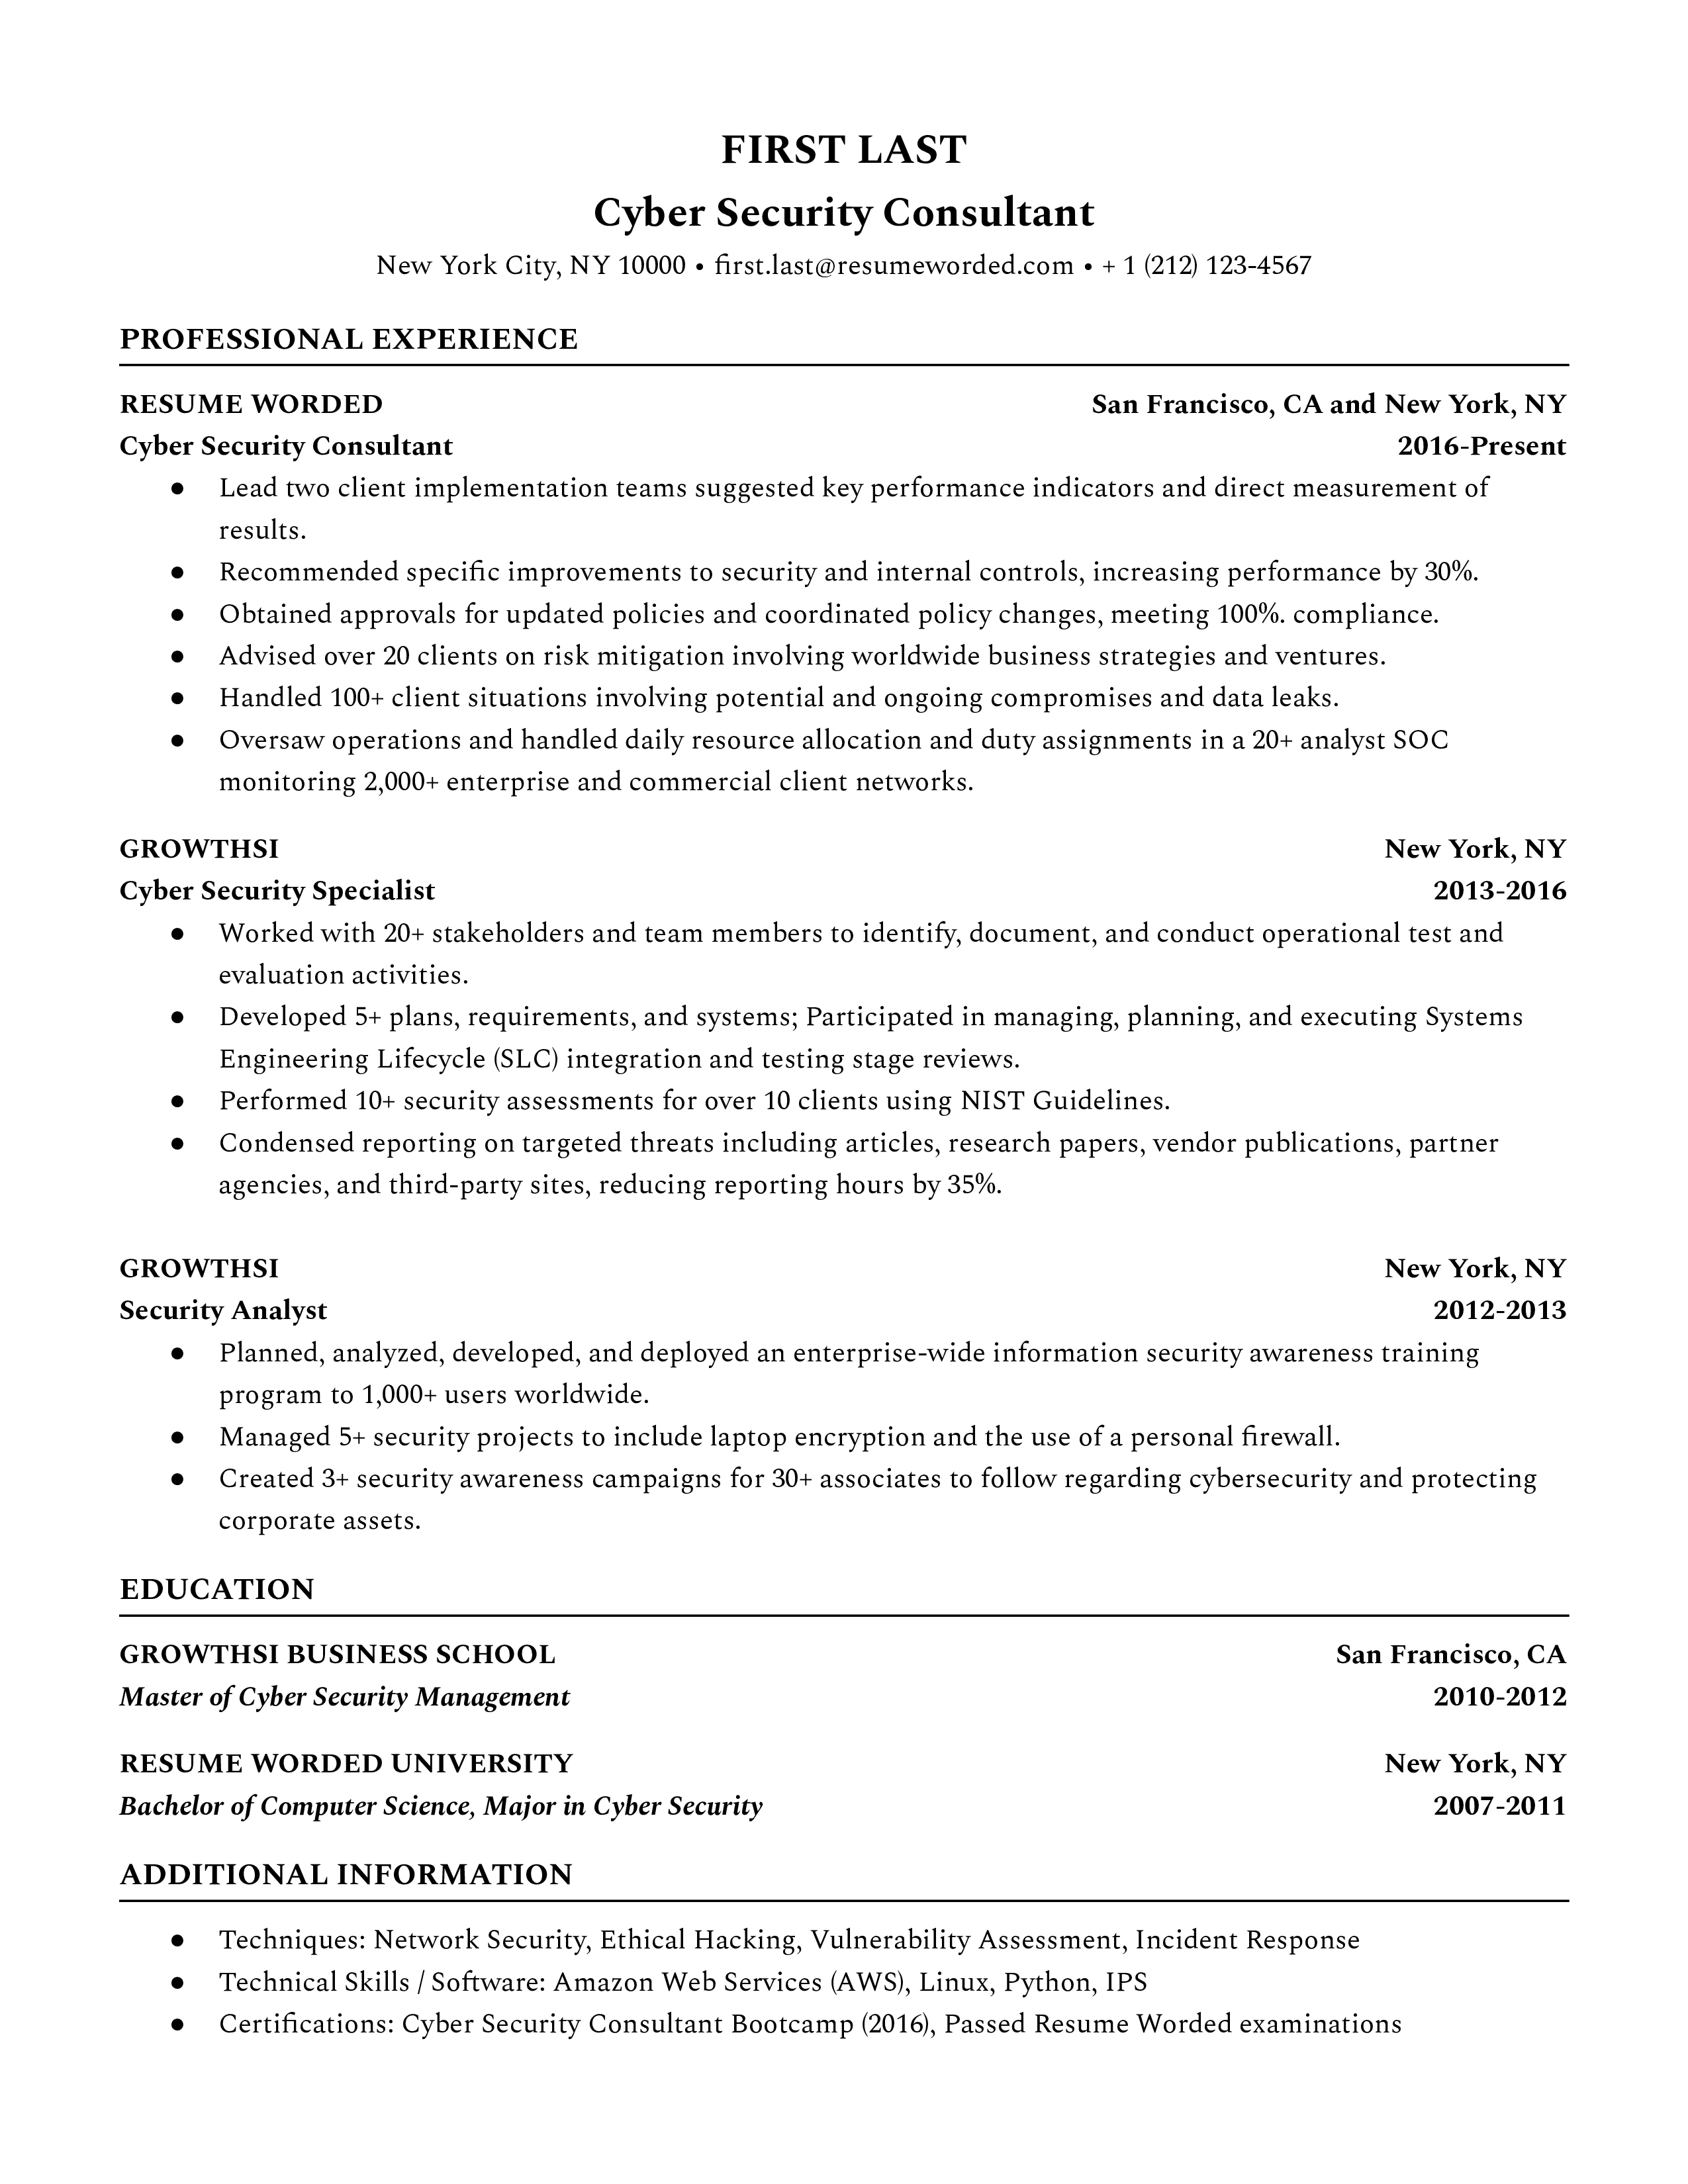 Cyber Security Consultant Resume Sample